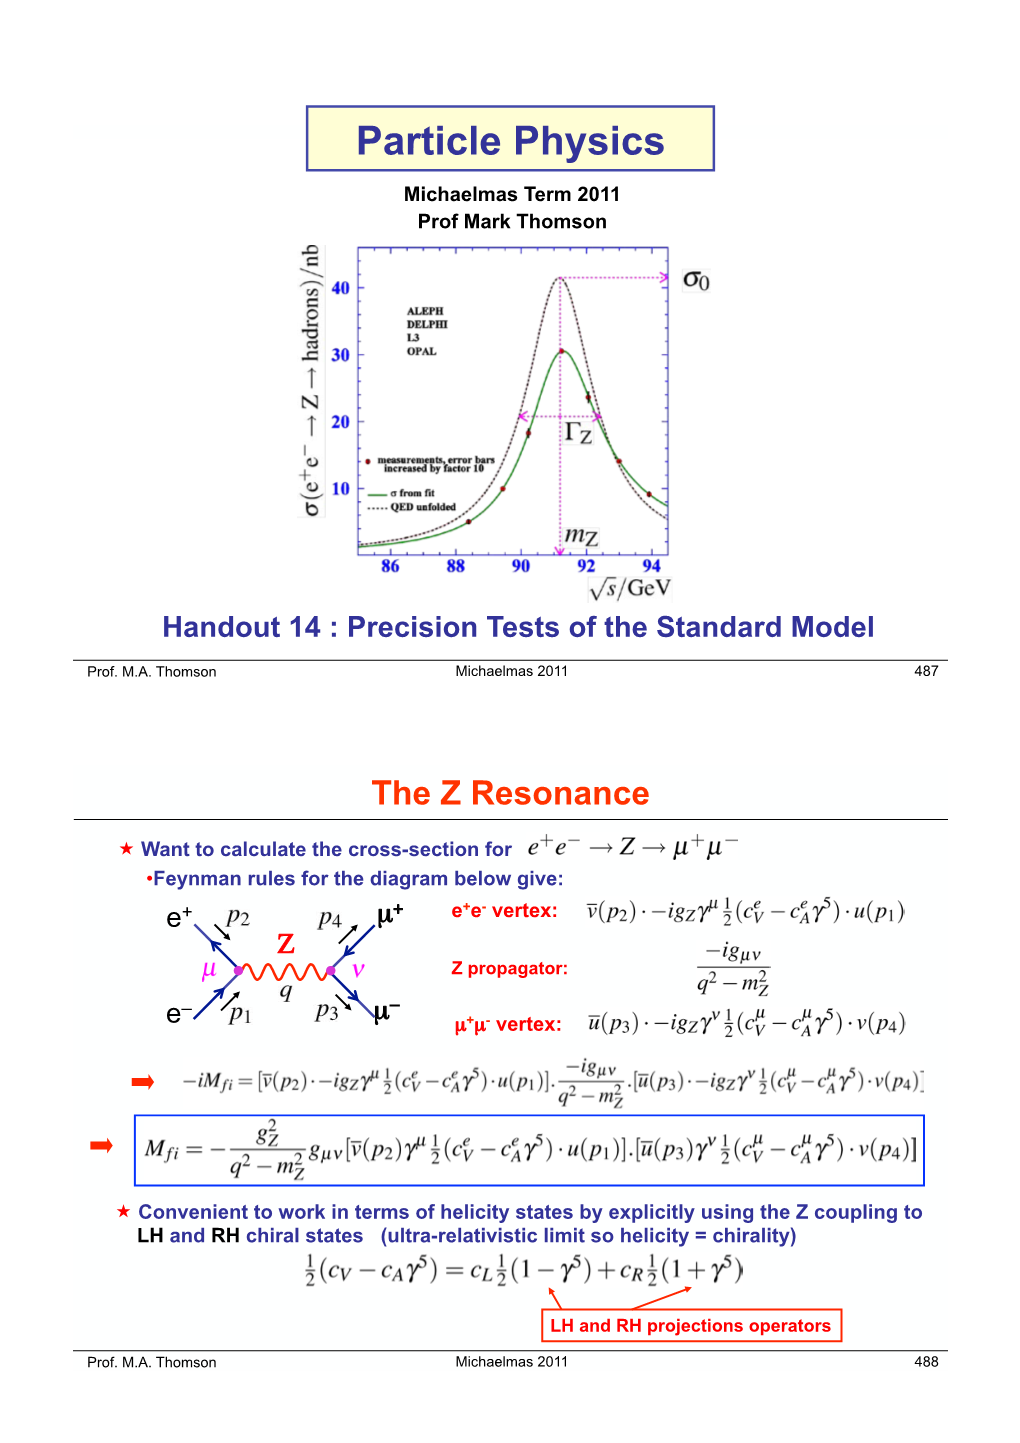 Handout 14 : Precision Tests of the Standard Model